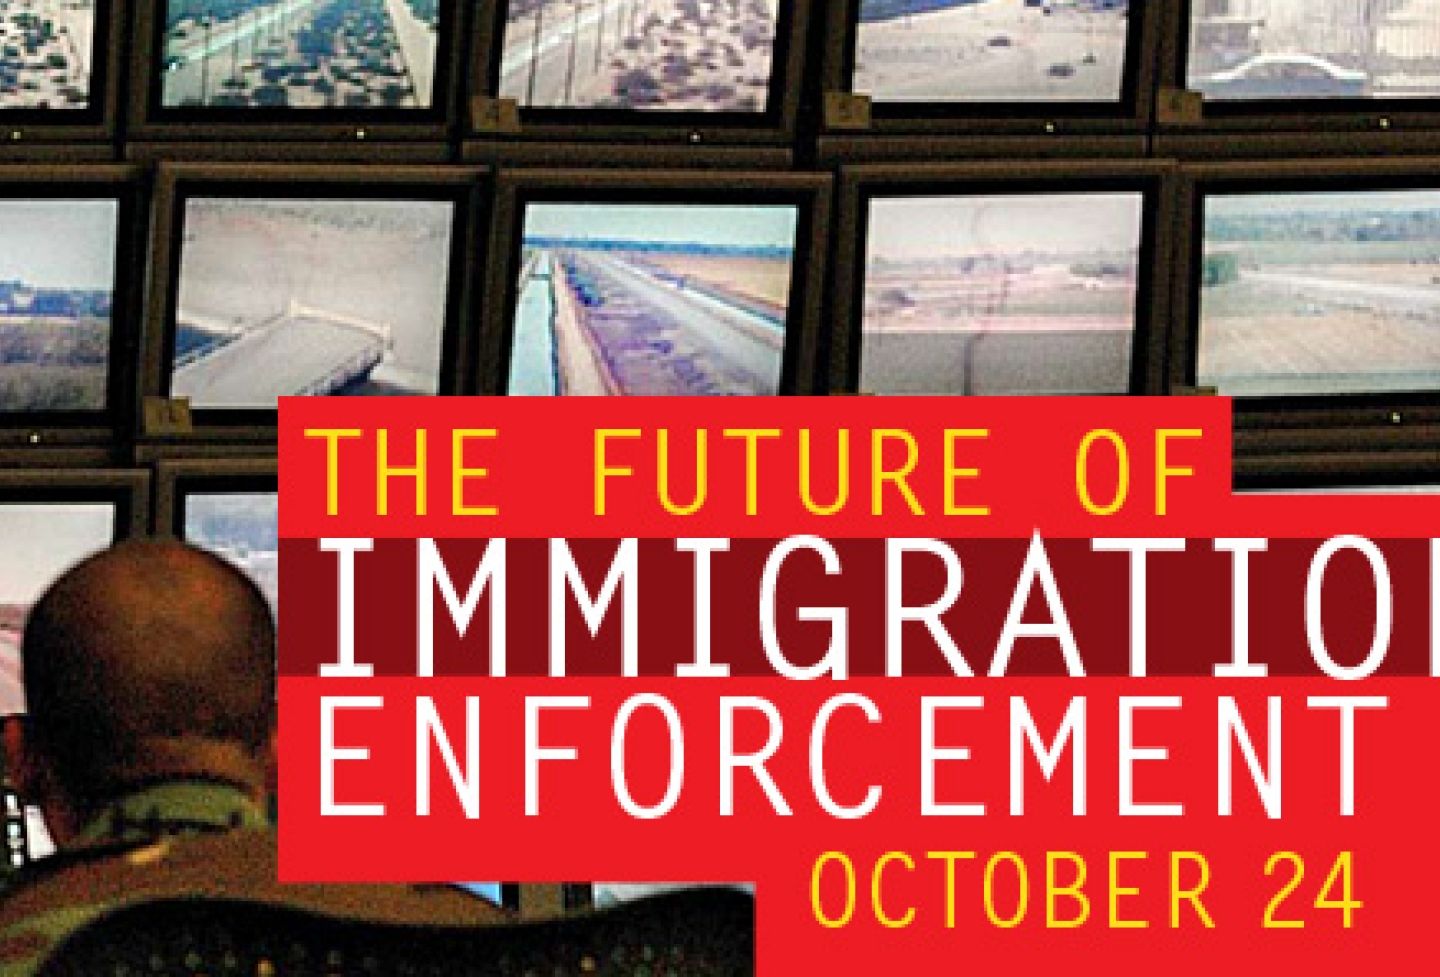 The Future of Immigration Enforcement